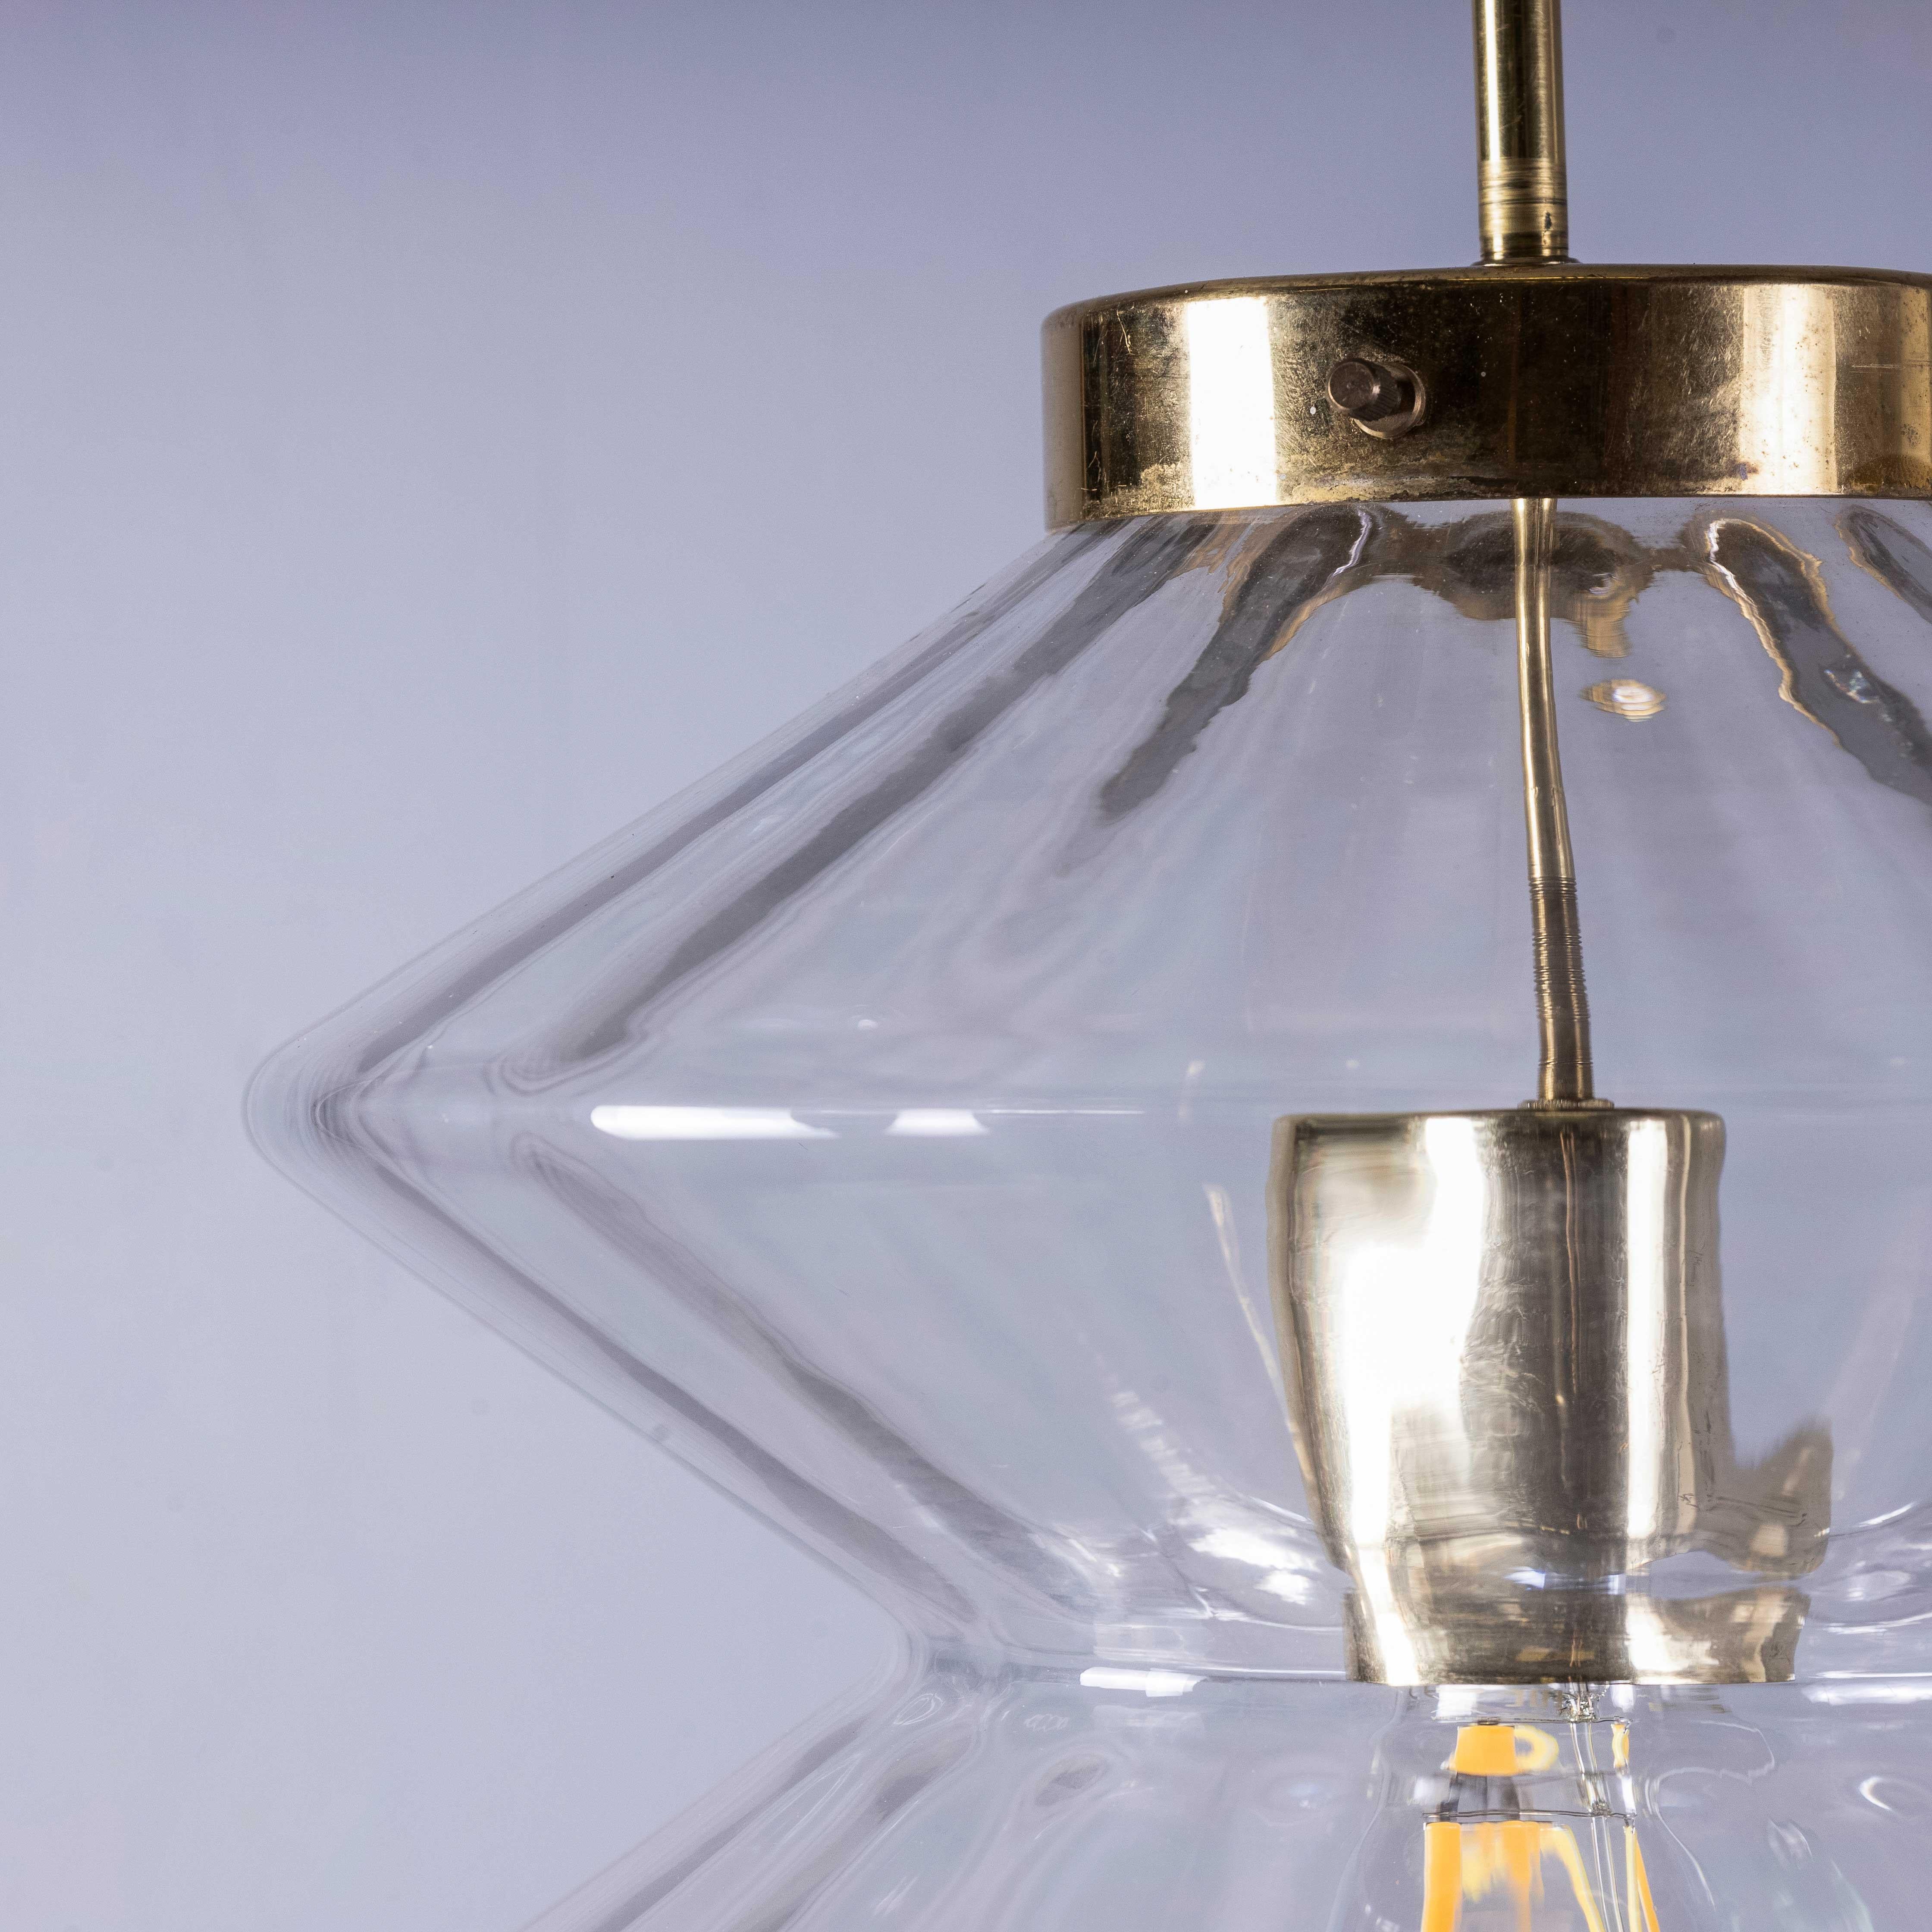 1950’s Prismatic Double Diamond Crystal Pendant Lamps
1950’s Prismatic Double Diamond Crystal Pendant Lamps . Extraordinary prismatic glass lamps mouth blown in crystal by the iconic Lustry Kamenicky Senon glassworks. The Czech republic has a rich